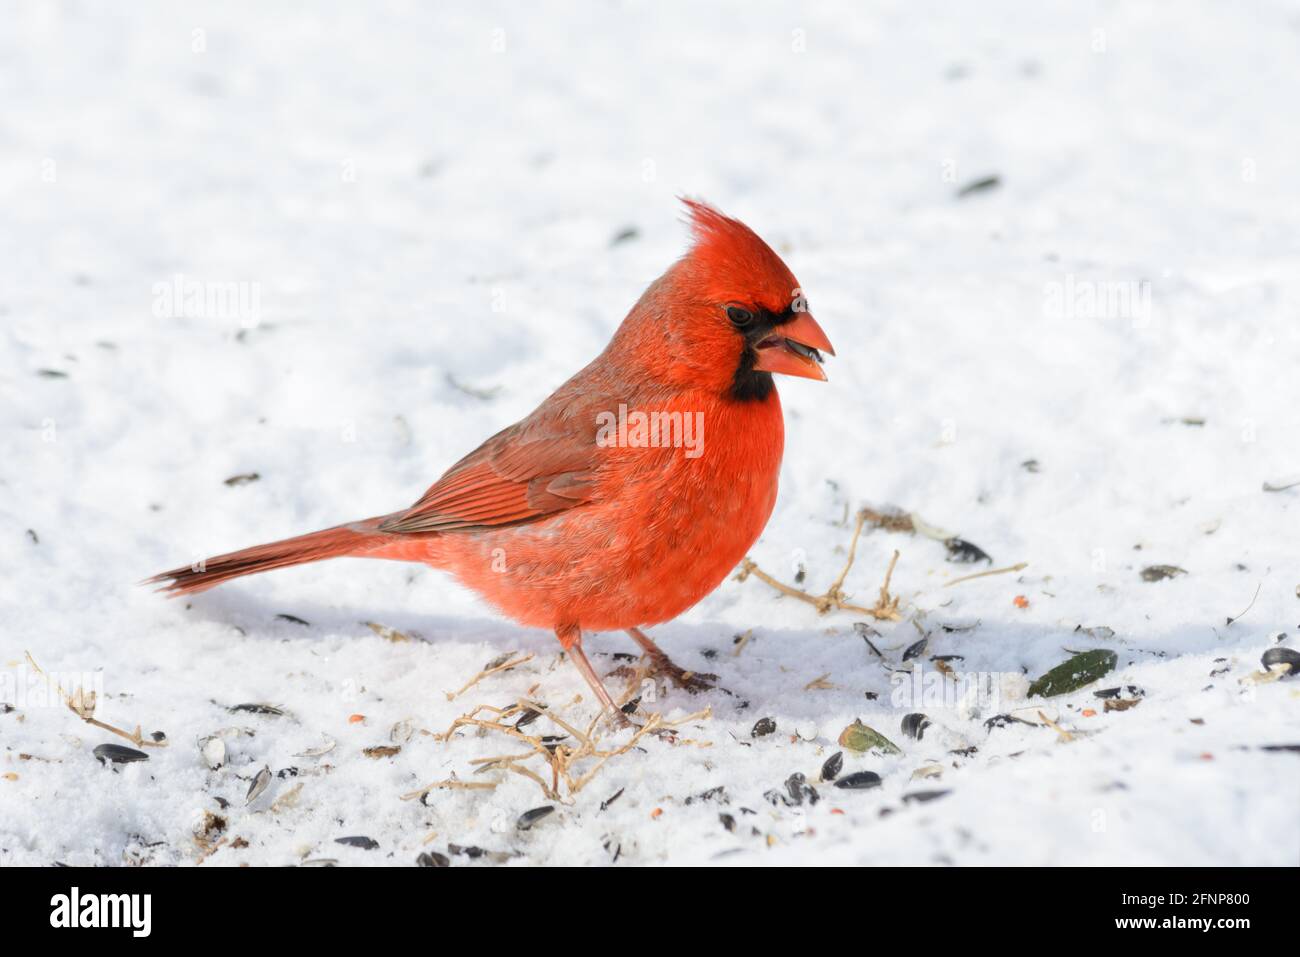 Brilliant red male Northern Cardinal in snow, eating sunflower seeds, on a sunny winter day Stock Photo